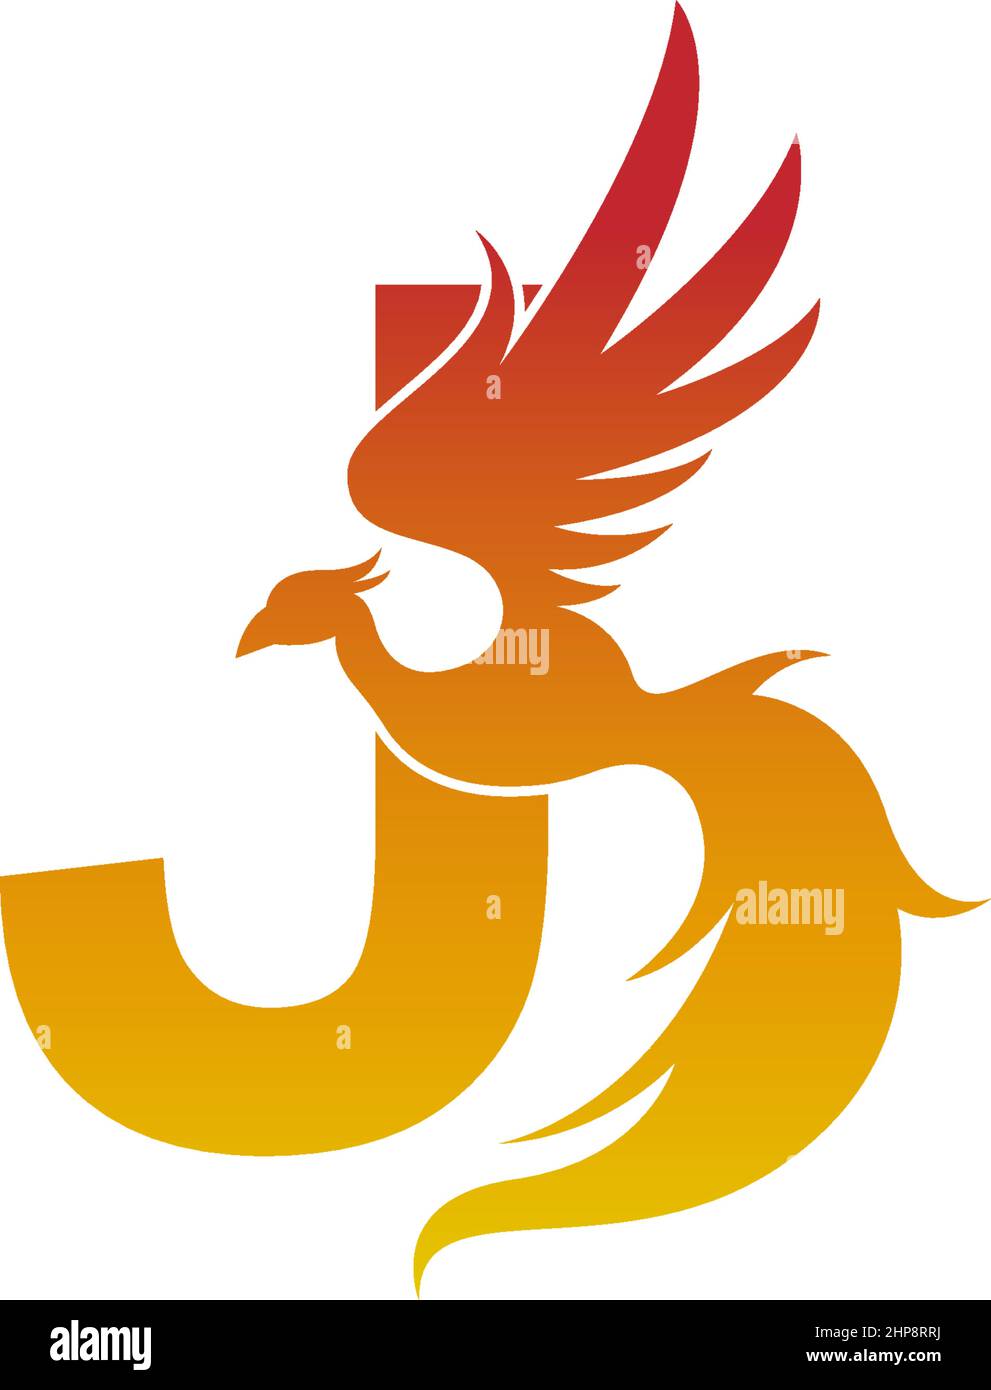 Letter J icon with phoenix logo design template Stock Vector